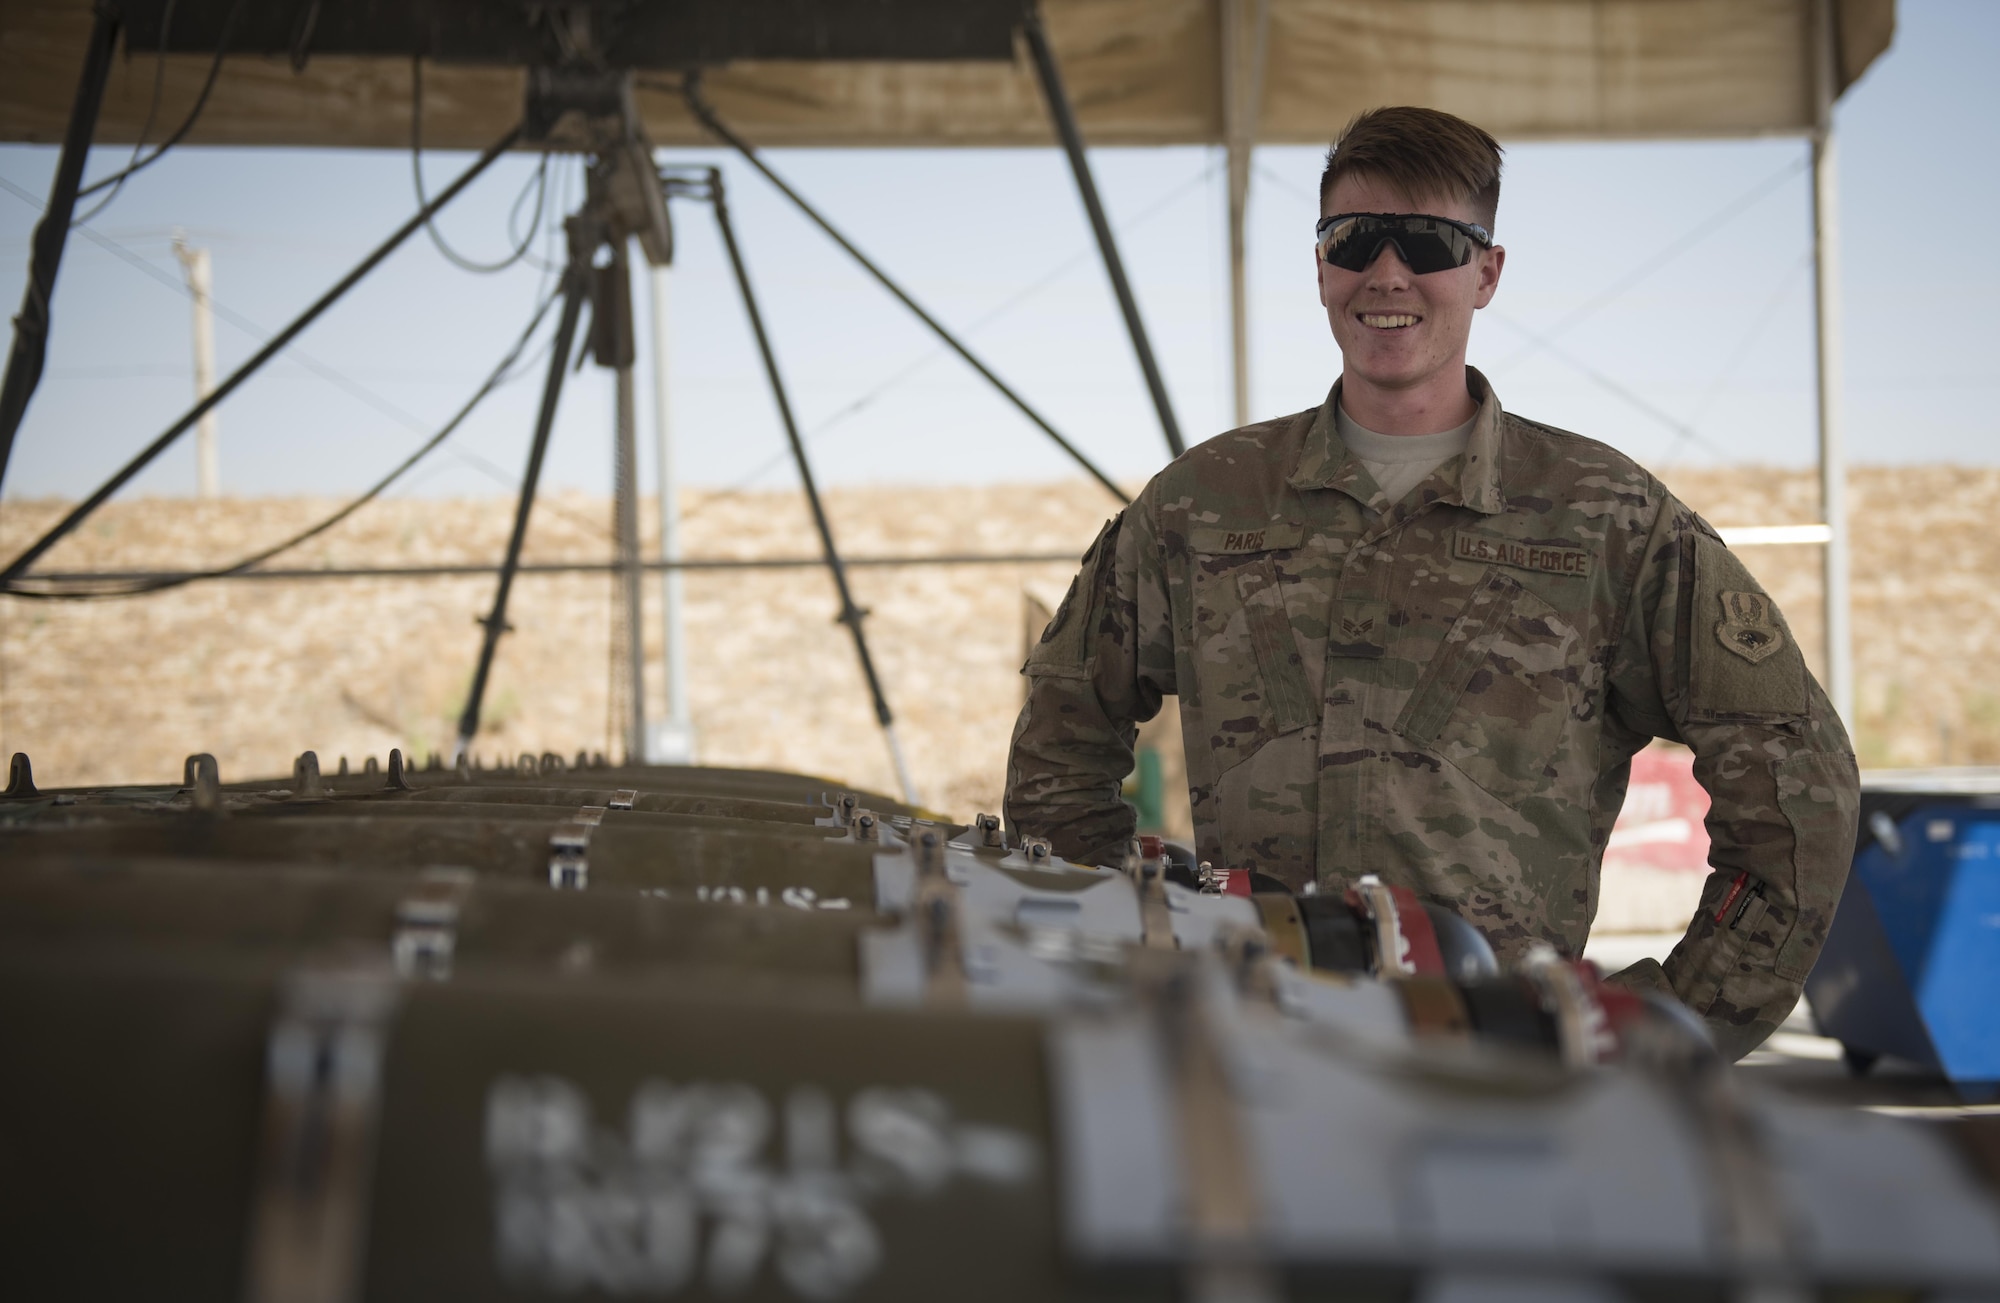 Senior Airman David Paris is a munitions systems specialist assigned to the 455th Expeditionary Maintenance Squadron, Bagram Airfield, Afghanistan.